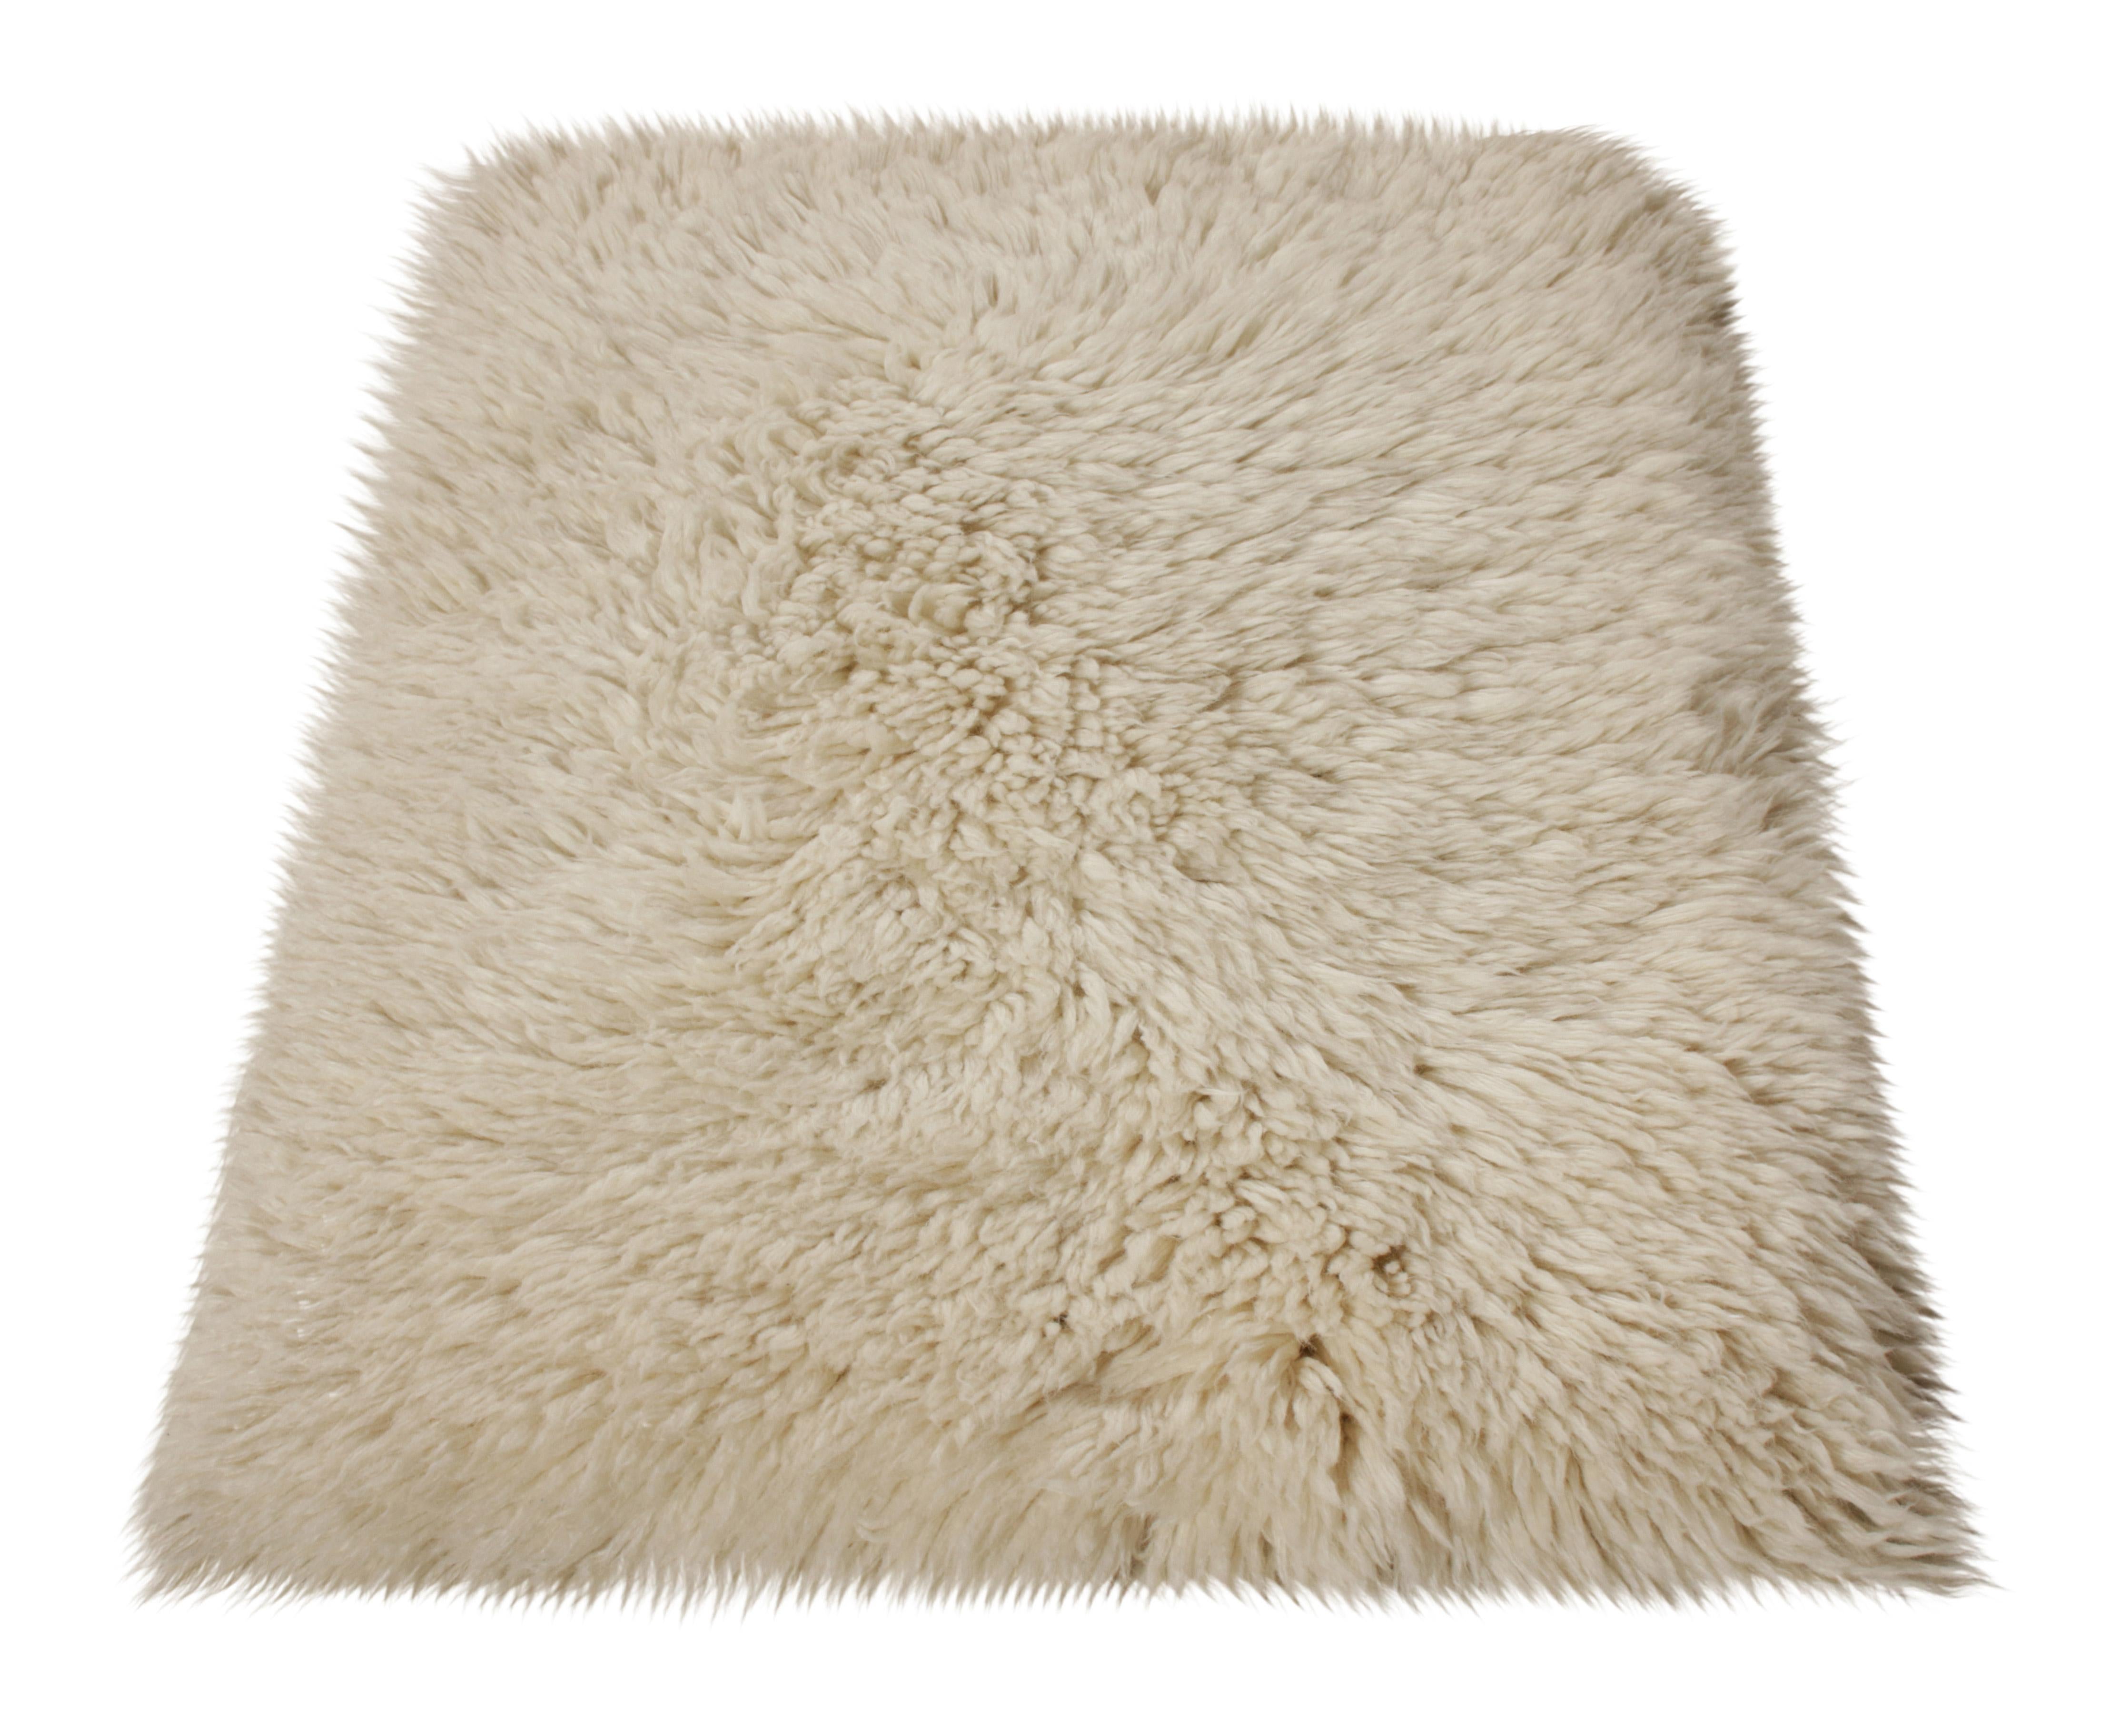 A 2x3 accent rug where Rug & Kilim makes a modern take on the celebrated Moroccan style. Hand knotted in wool, this comfortable contemporary in solid beige-white carries a welcoming personality with a luxurious high pile further complementing the